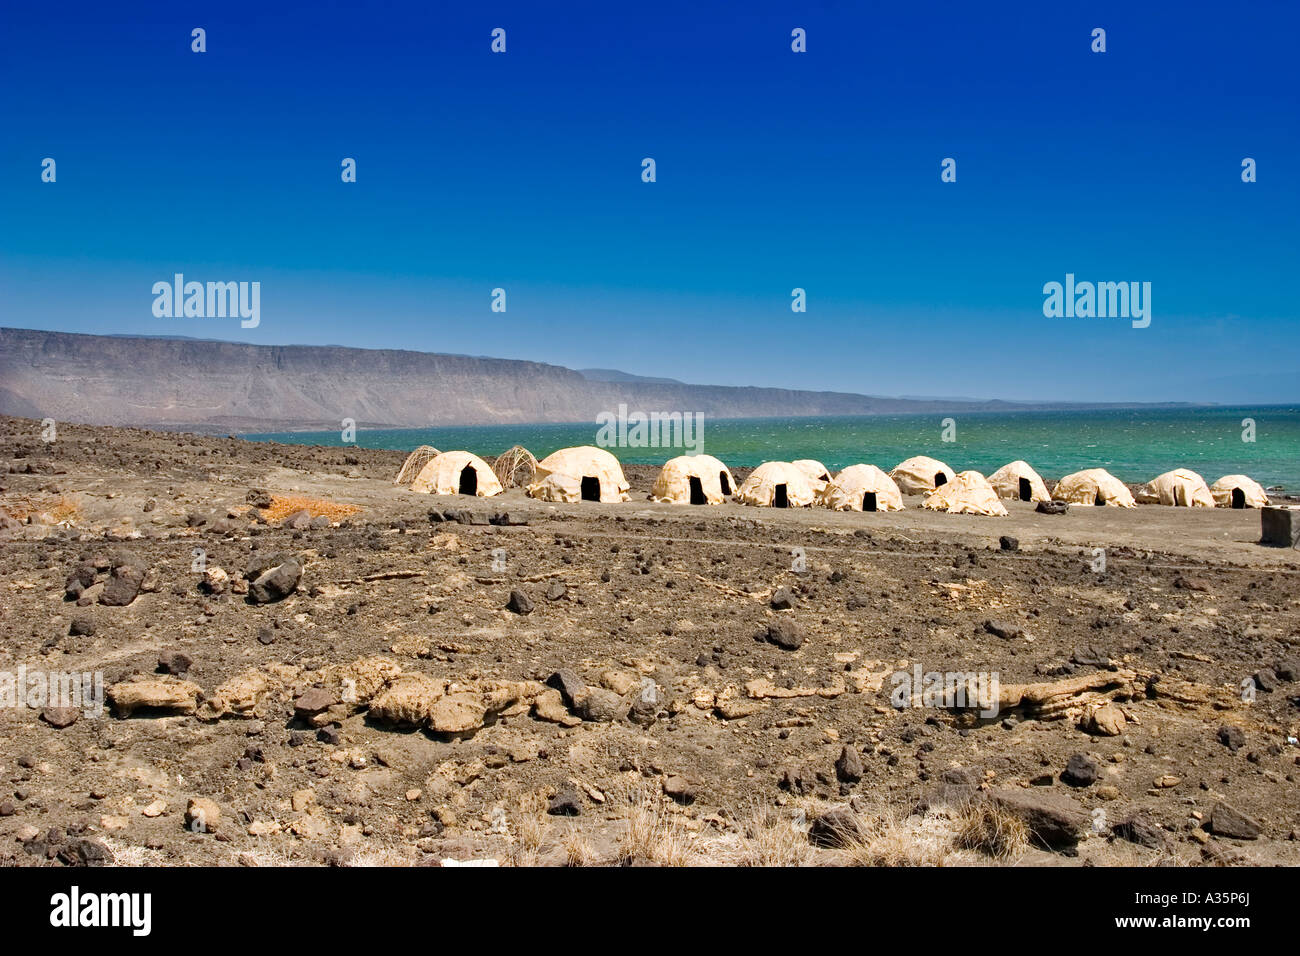 Bay of Ghoubbet, Afar huts, Djibouti, Africa Stock Photo